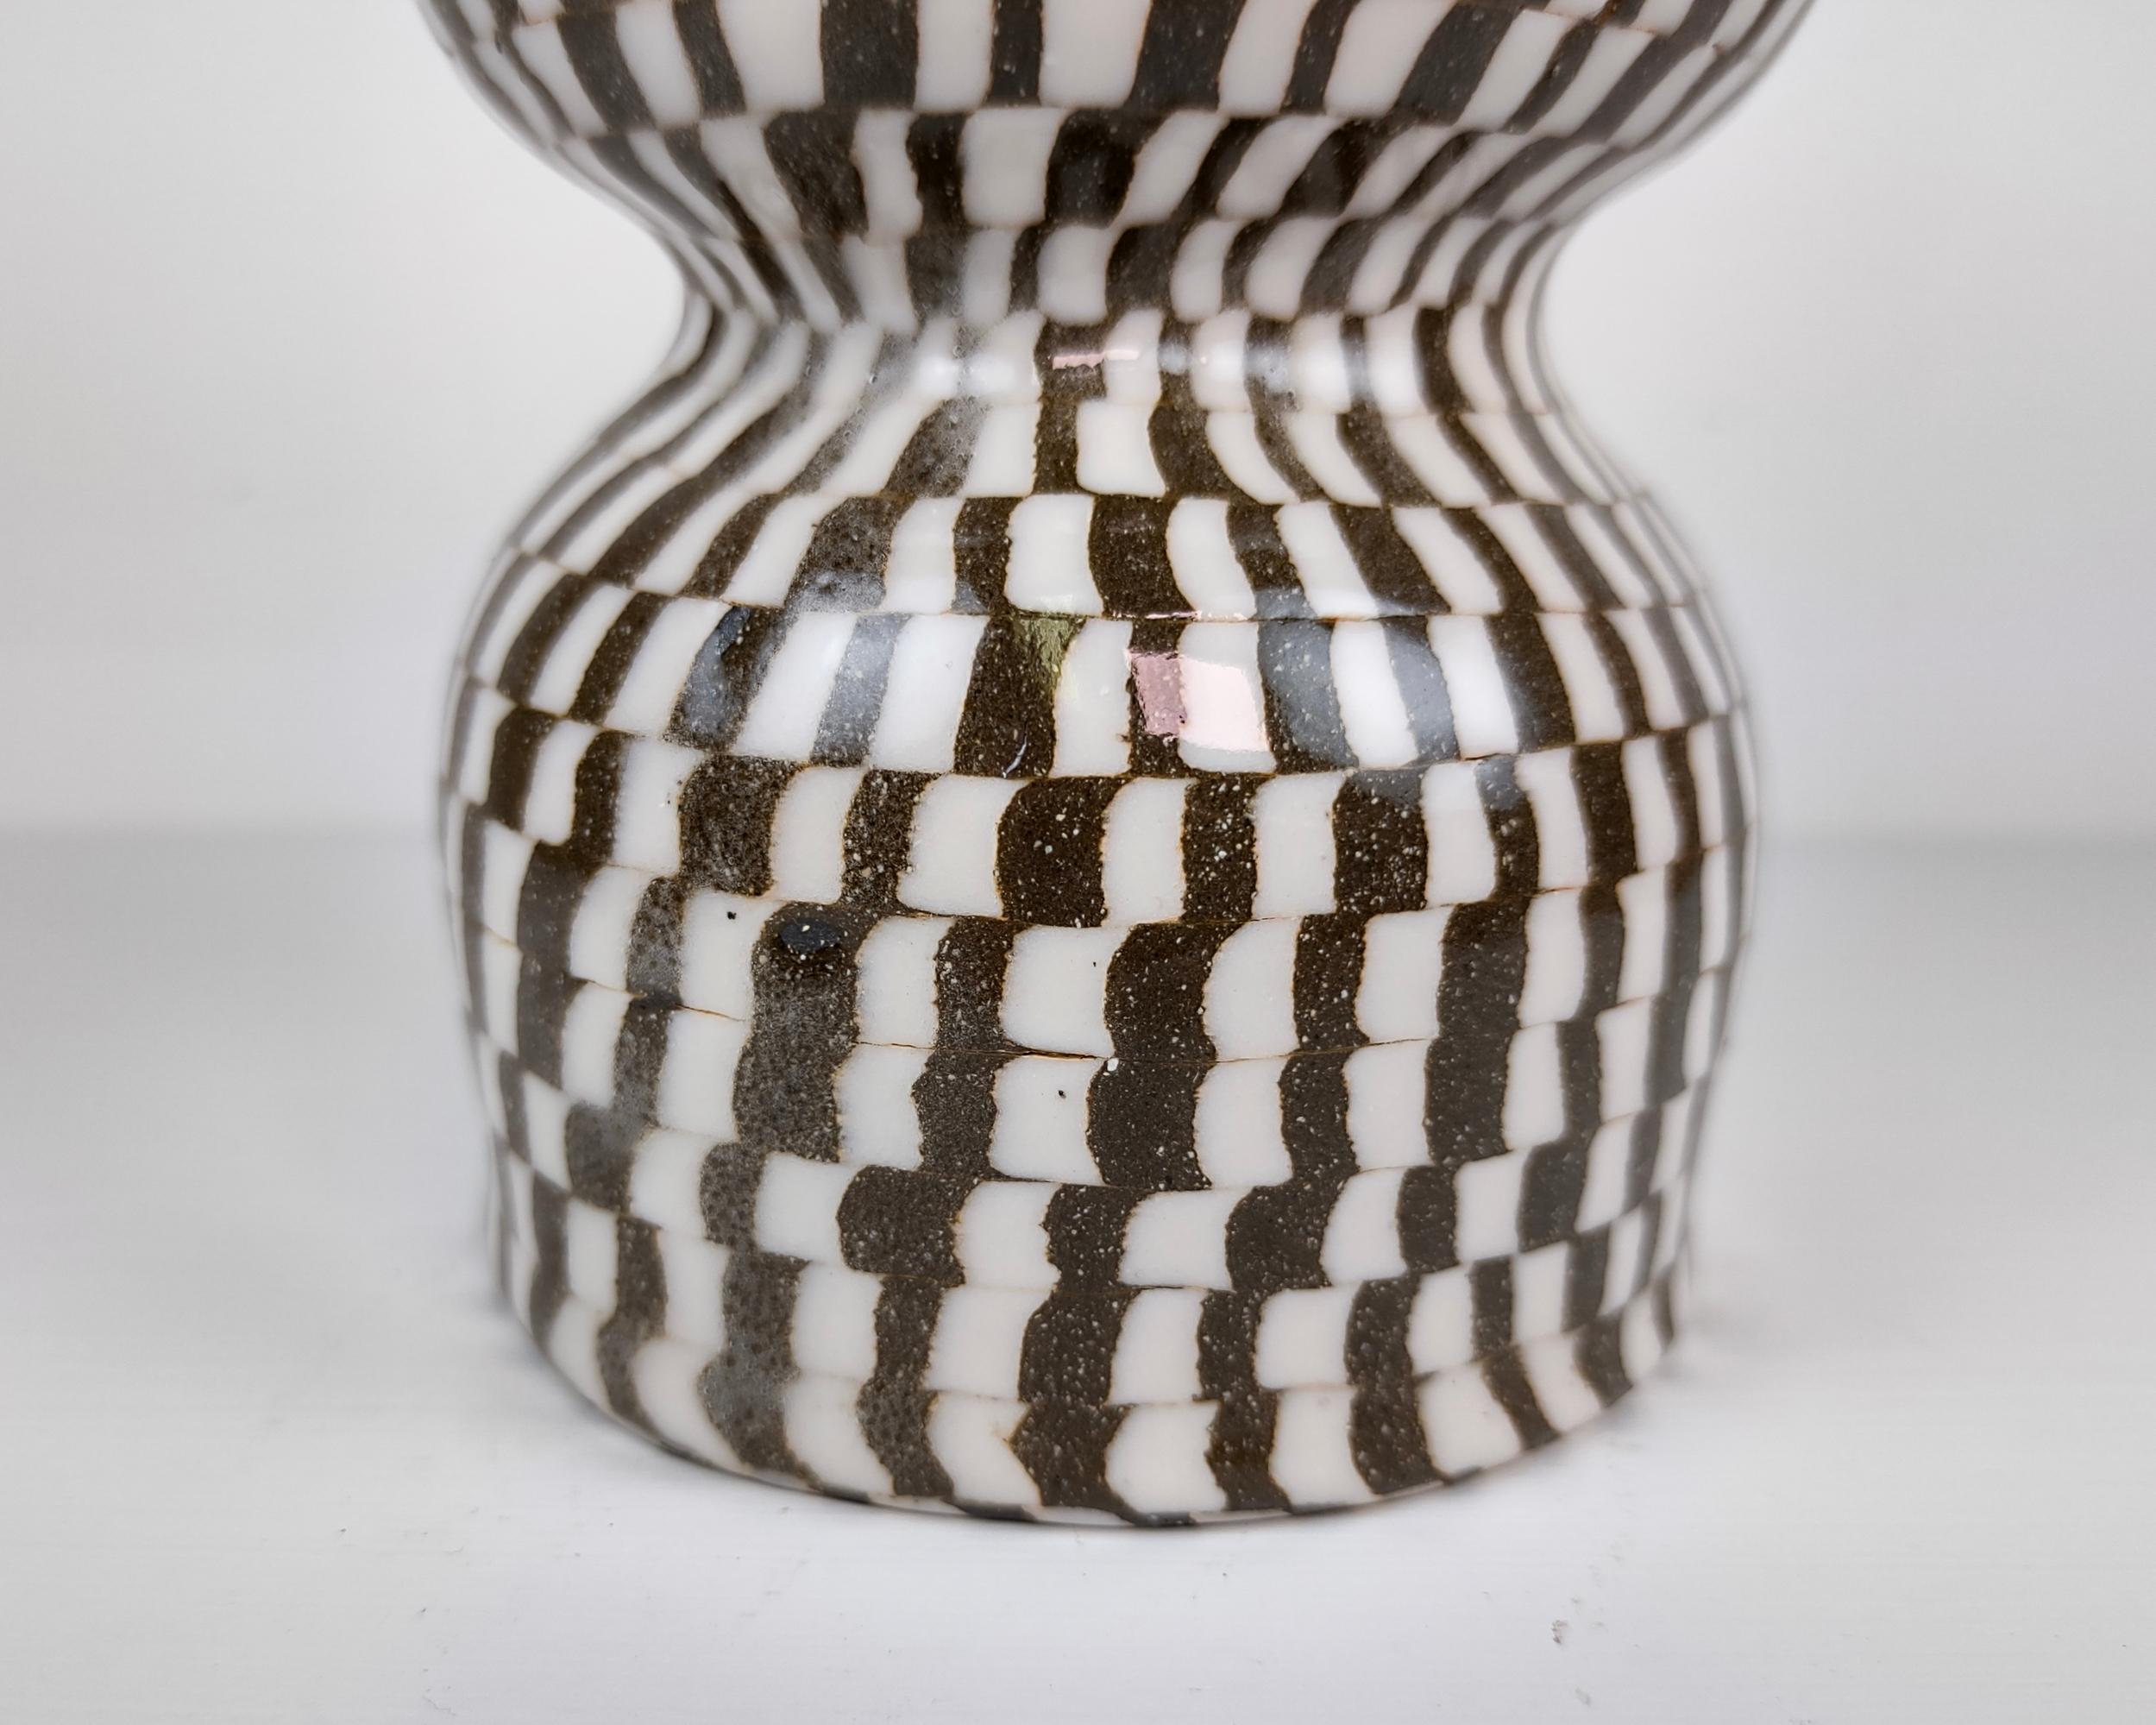 American Nerikomi Checkered Organic Modern Pinched Handmade Vase by Fizzy Ceramics For Sale